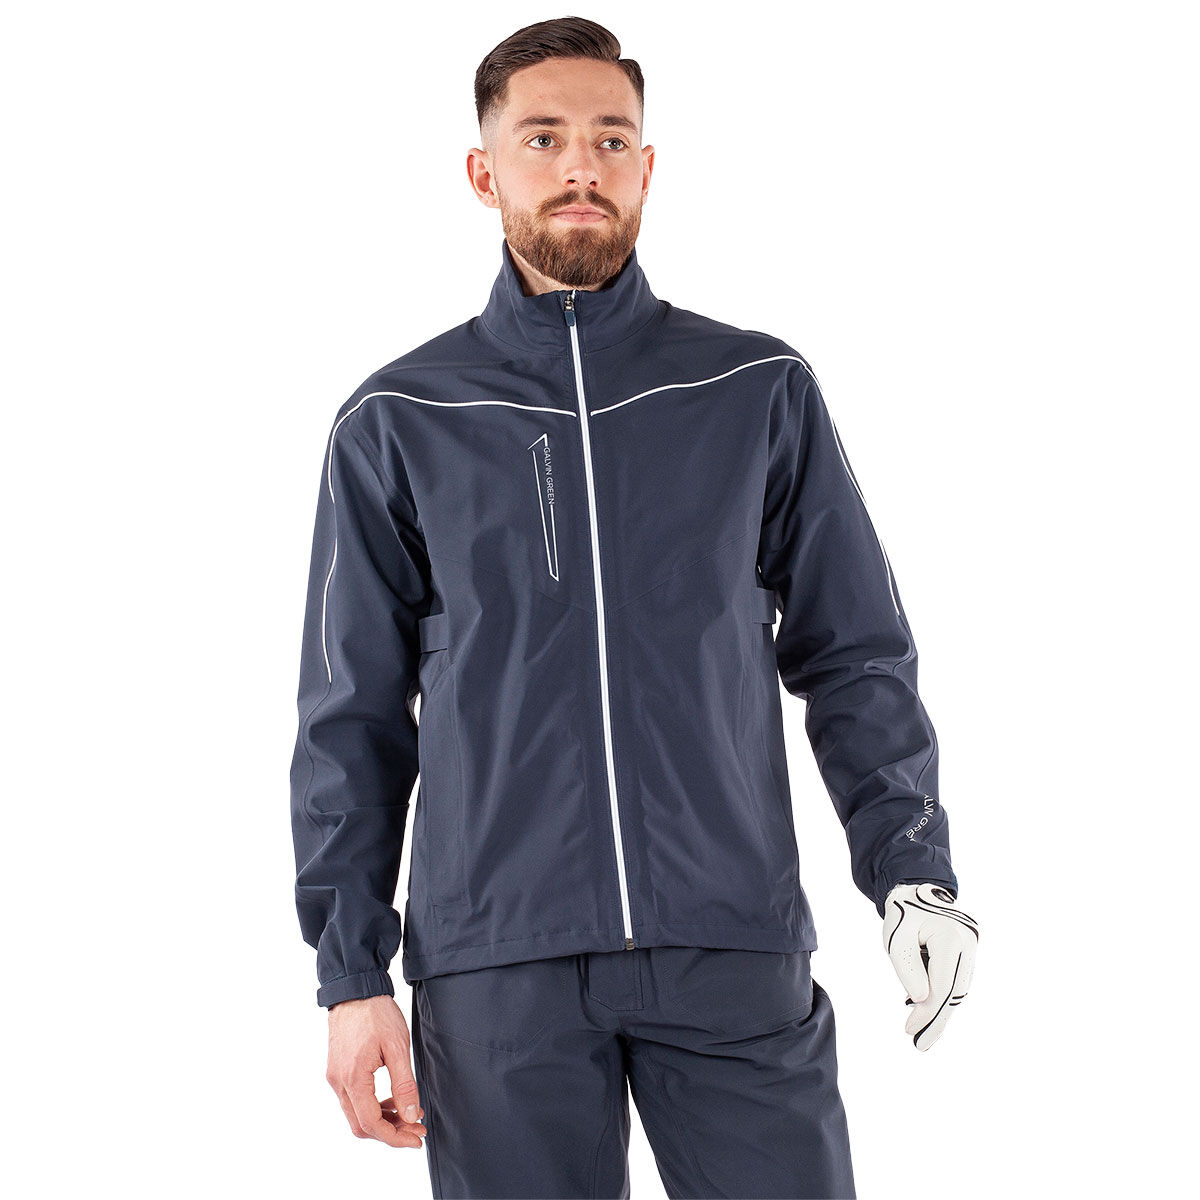 Galvin Green Men’s Armstrong Waterproof Golf Jacket, Mens, Navy/white, Small | American Golf